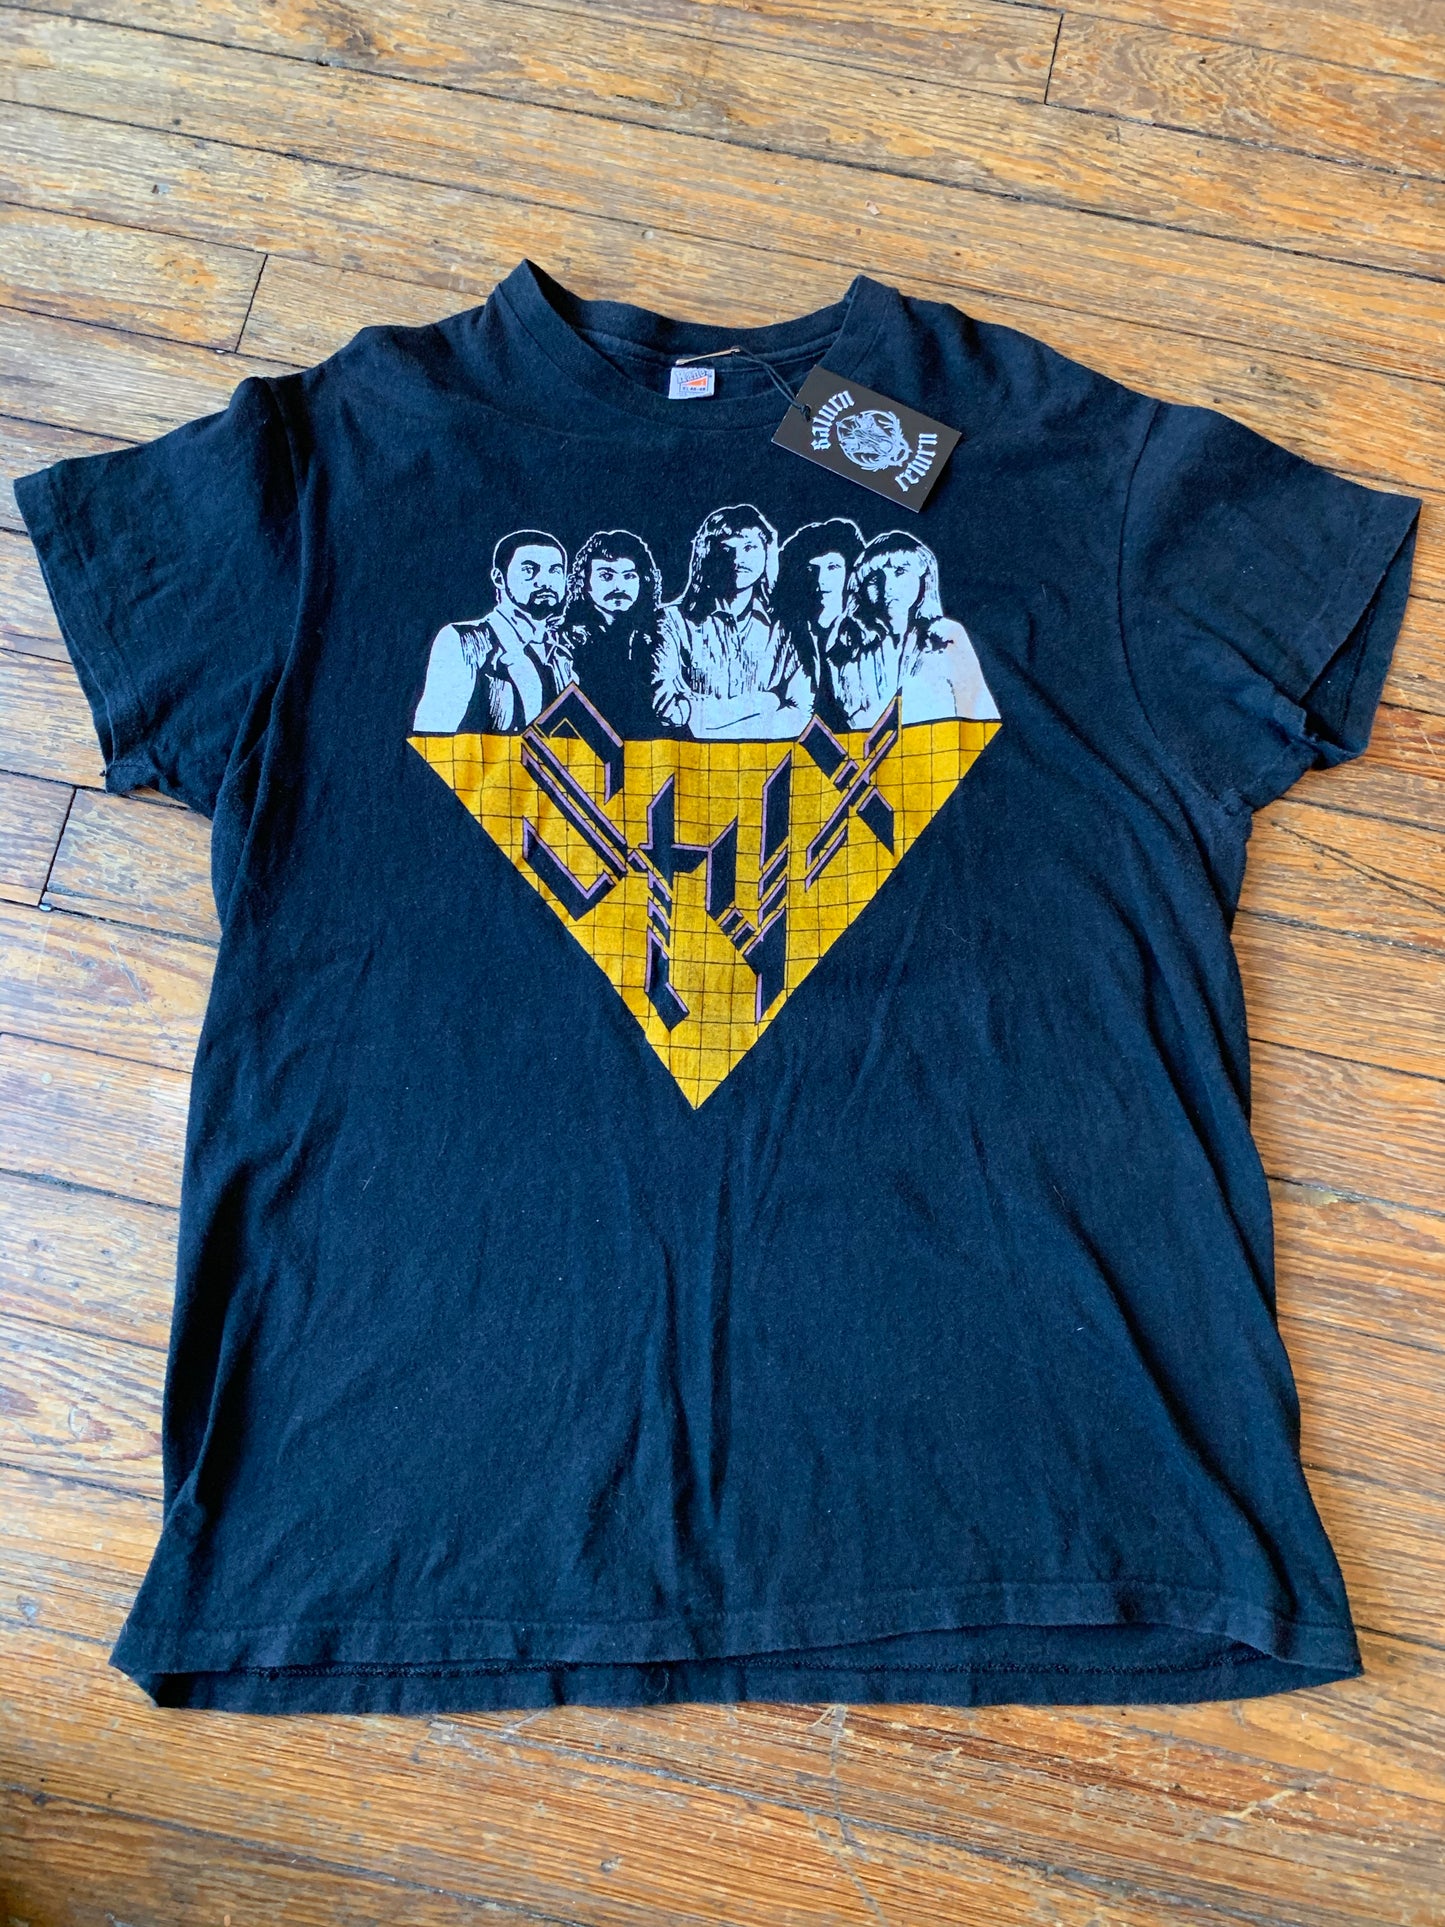 Vintage 1970’s Styx Band T-Shirt